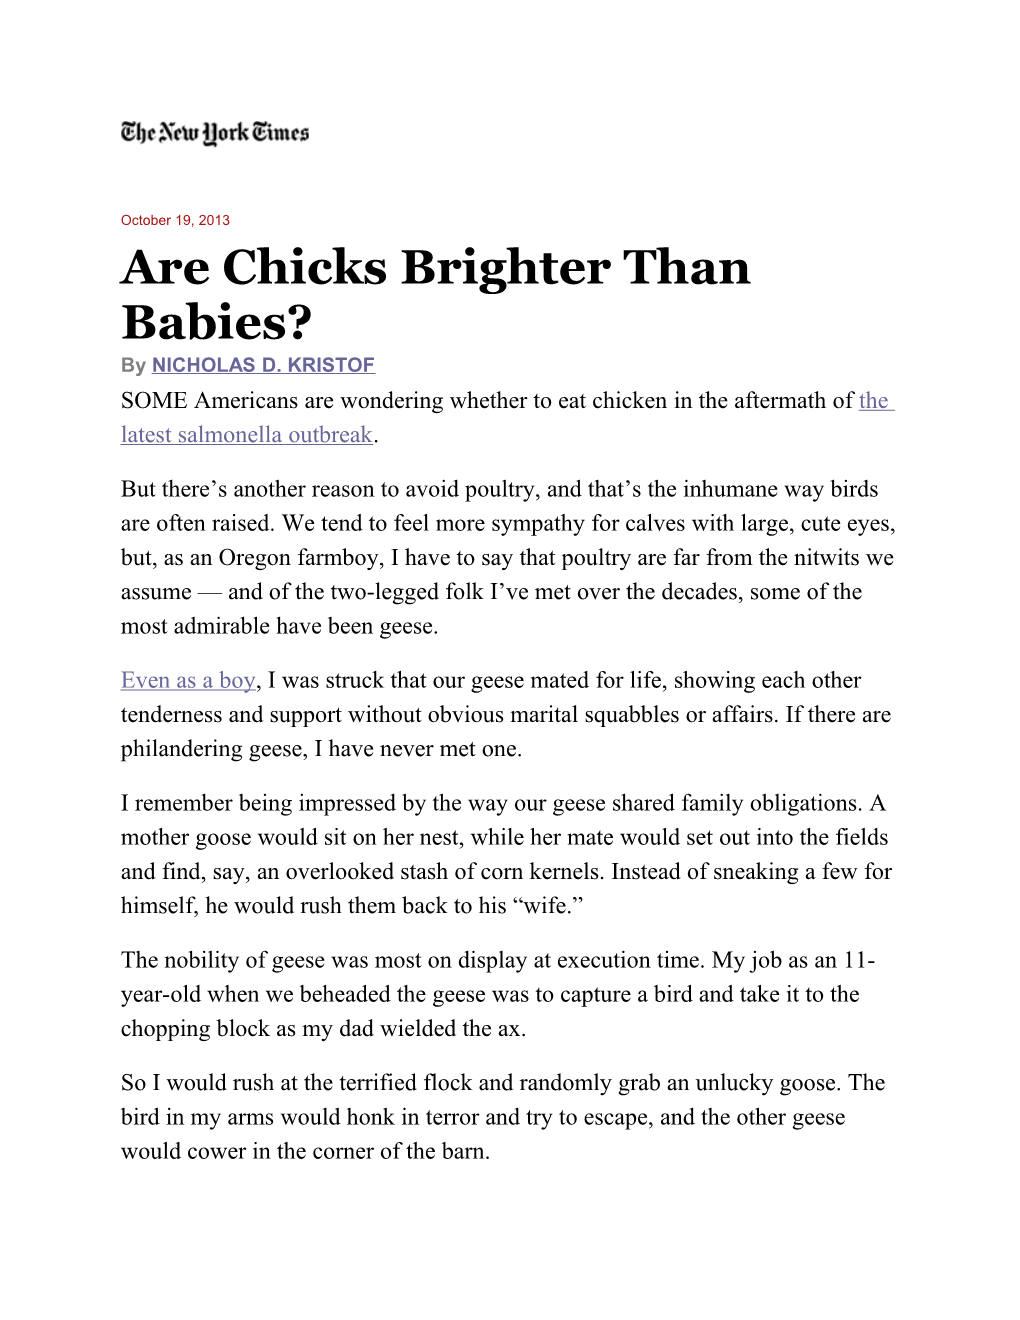 Are Chicks Brighter Than Babies?